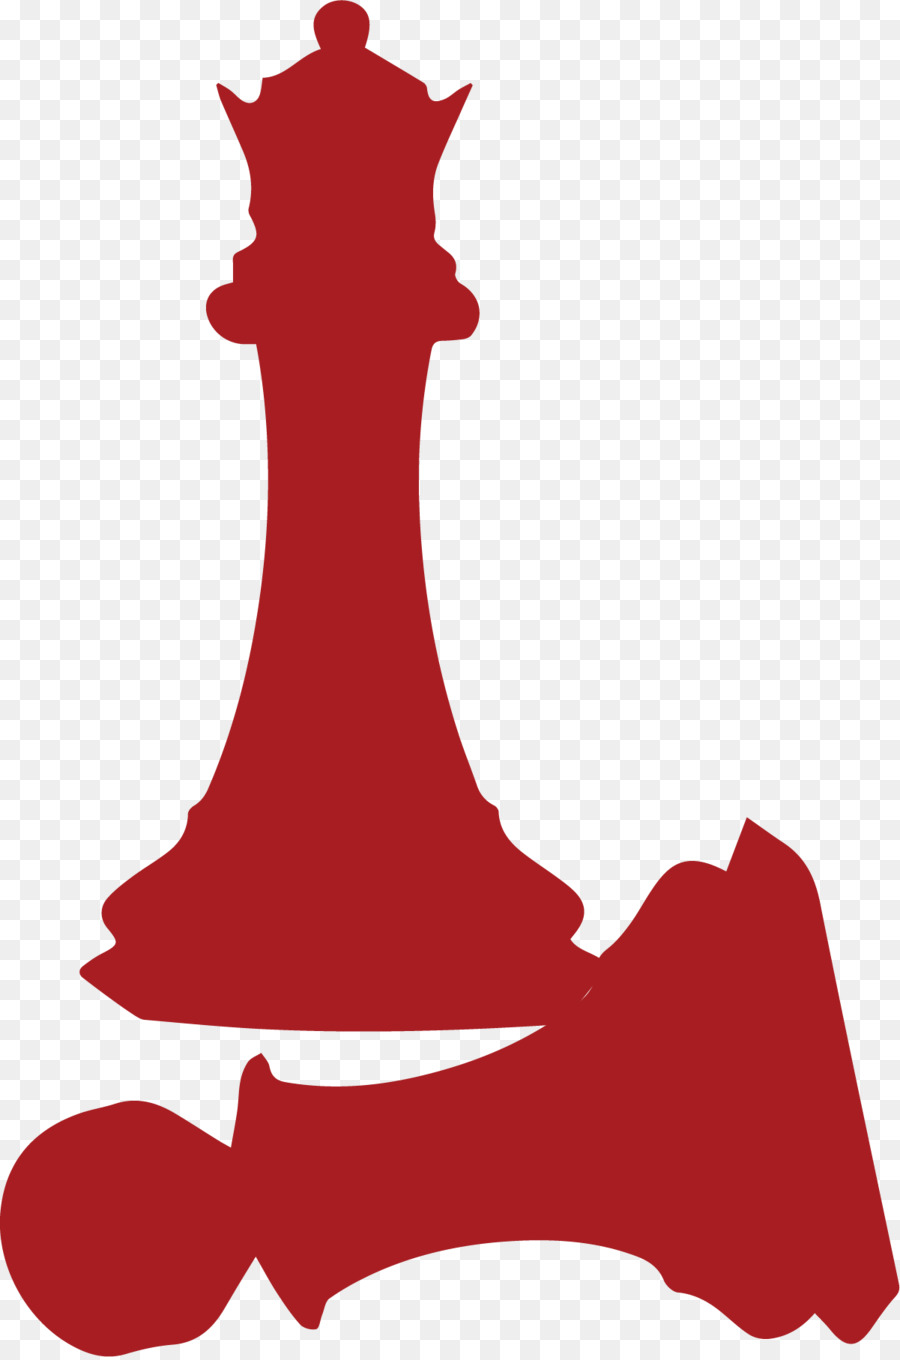 Chess piece Queen King Knight - chess png download - 1201*1811 - Free Transparent Chess png Download.